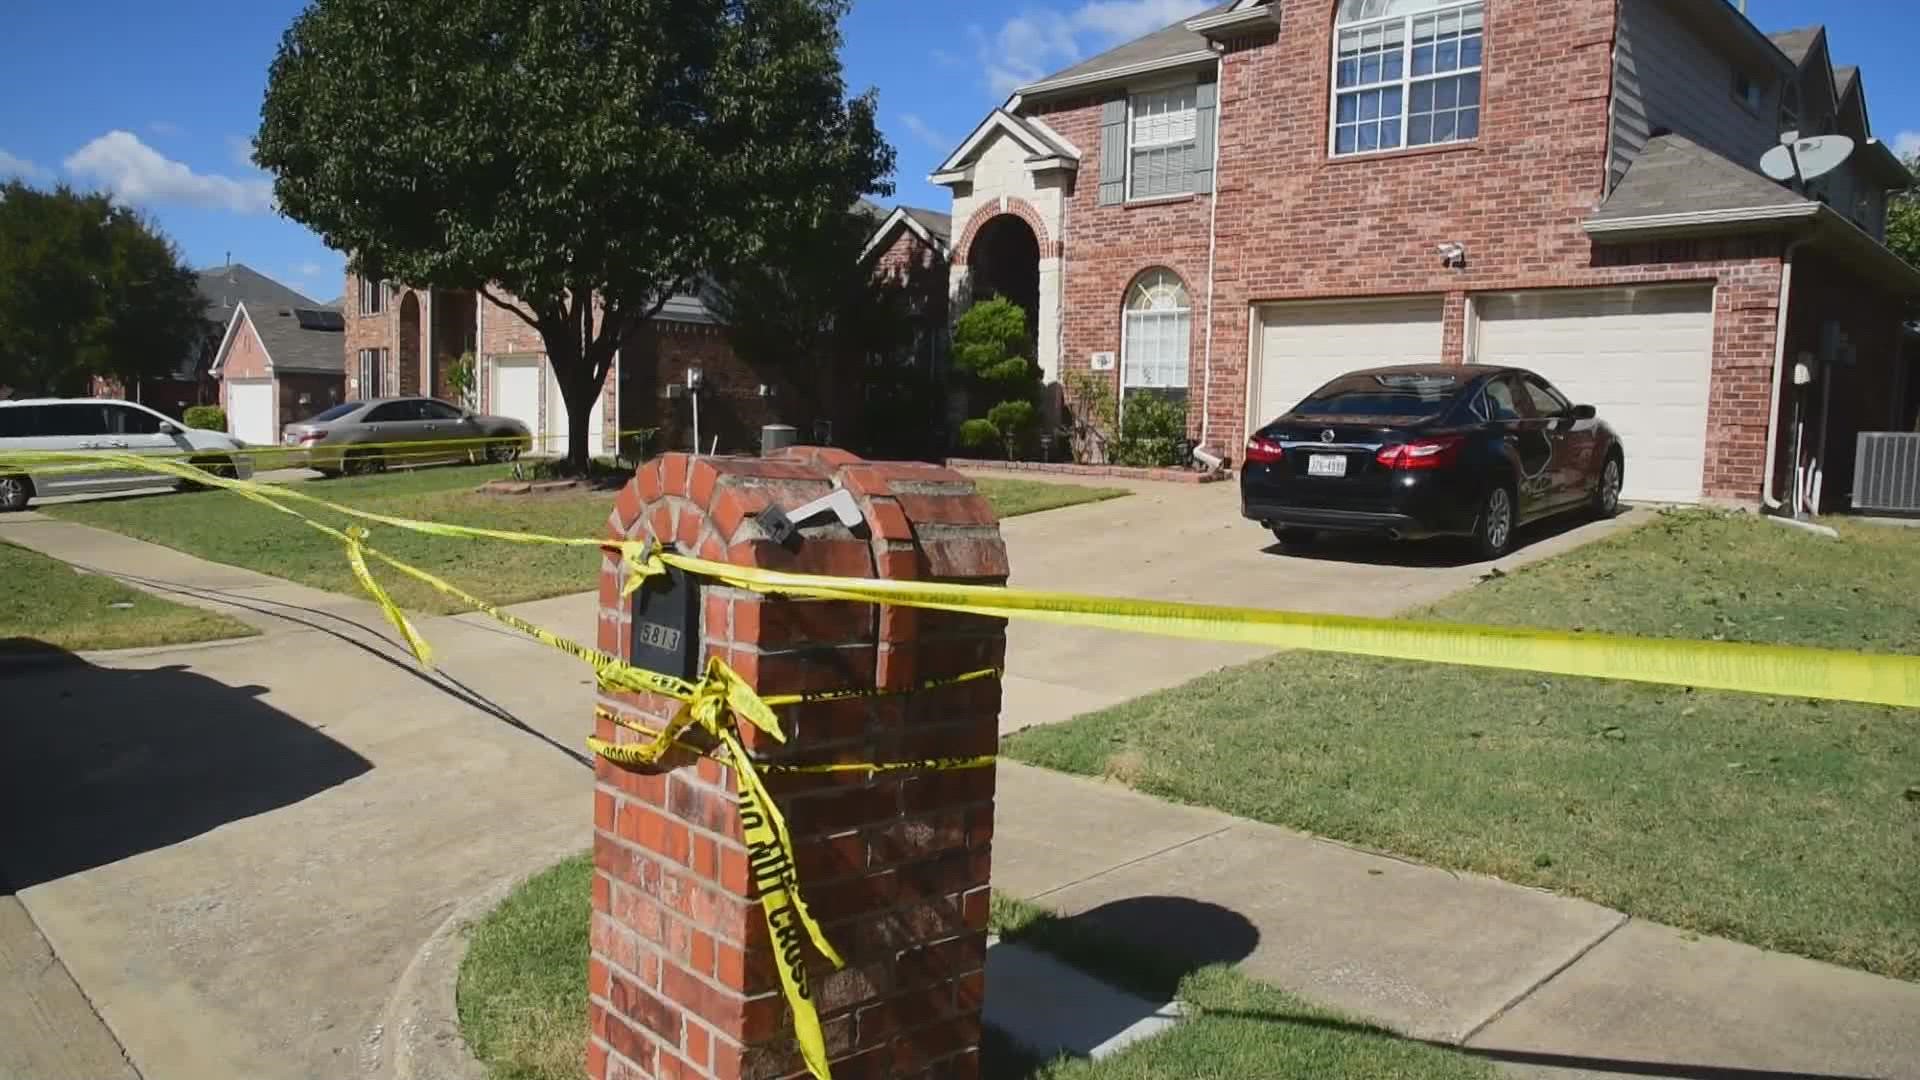 A man is facing a capitol murder charge after shooting and killing his sister and his sister’s boyfriend, Plano police said.